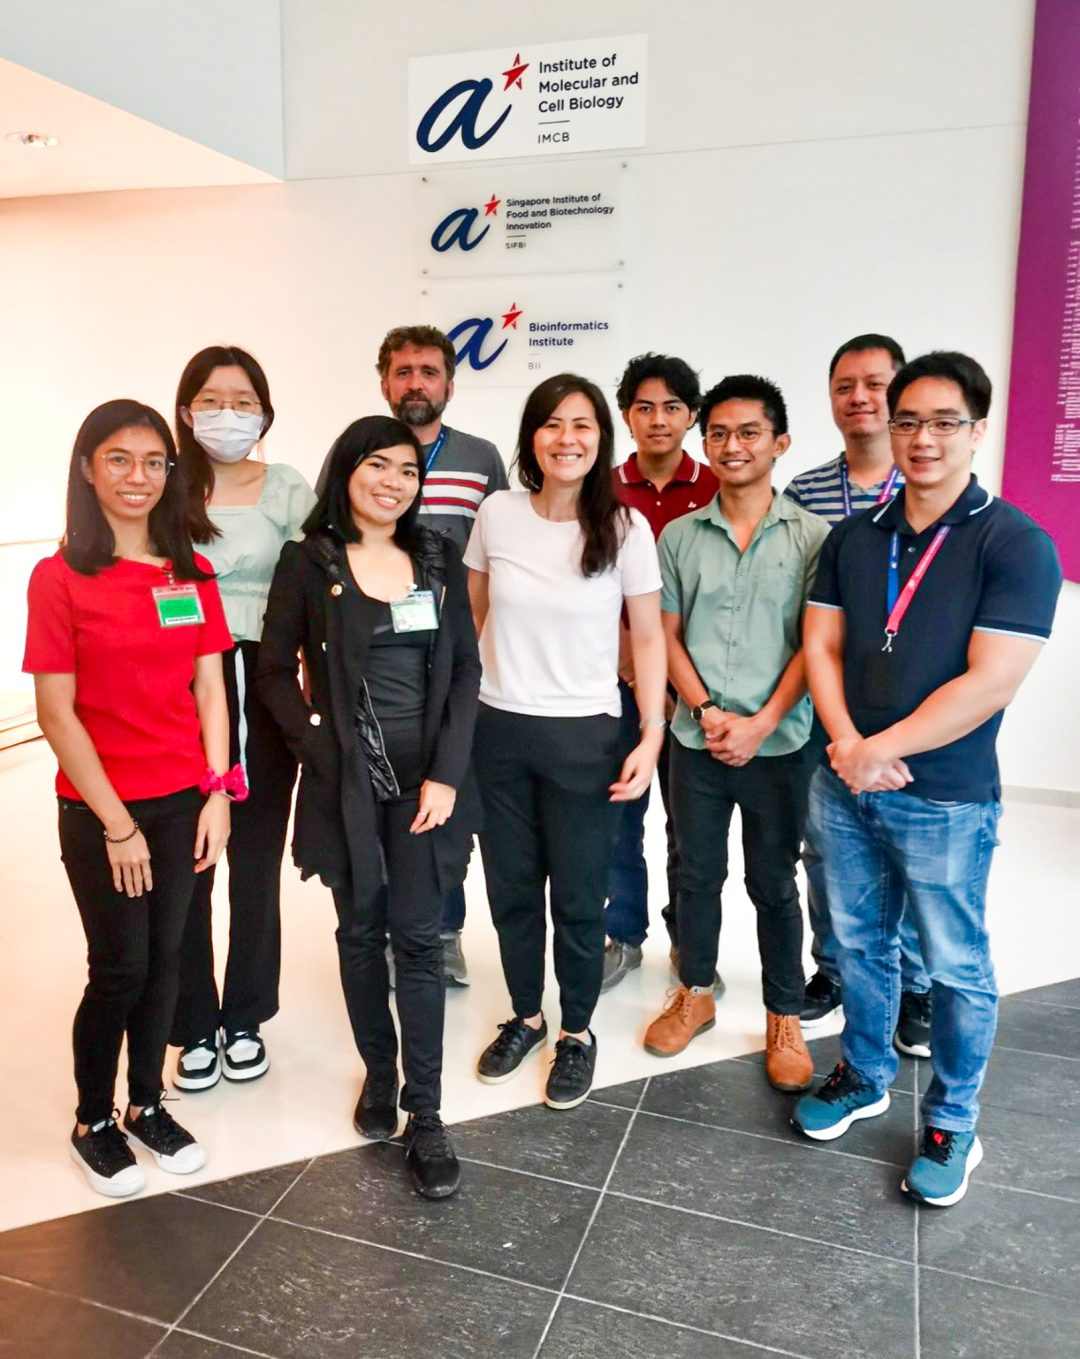 PPMF staff receive further LCMS proteomics training at the Institute